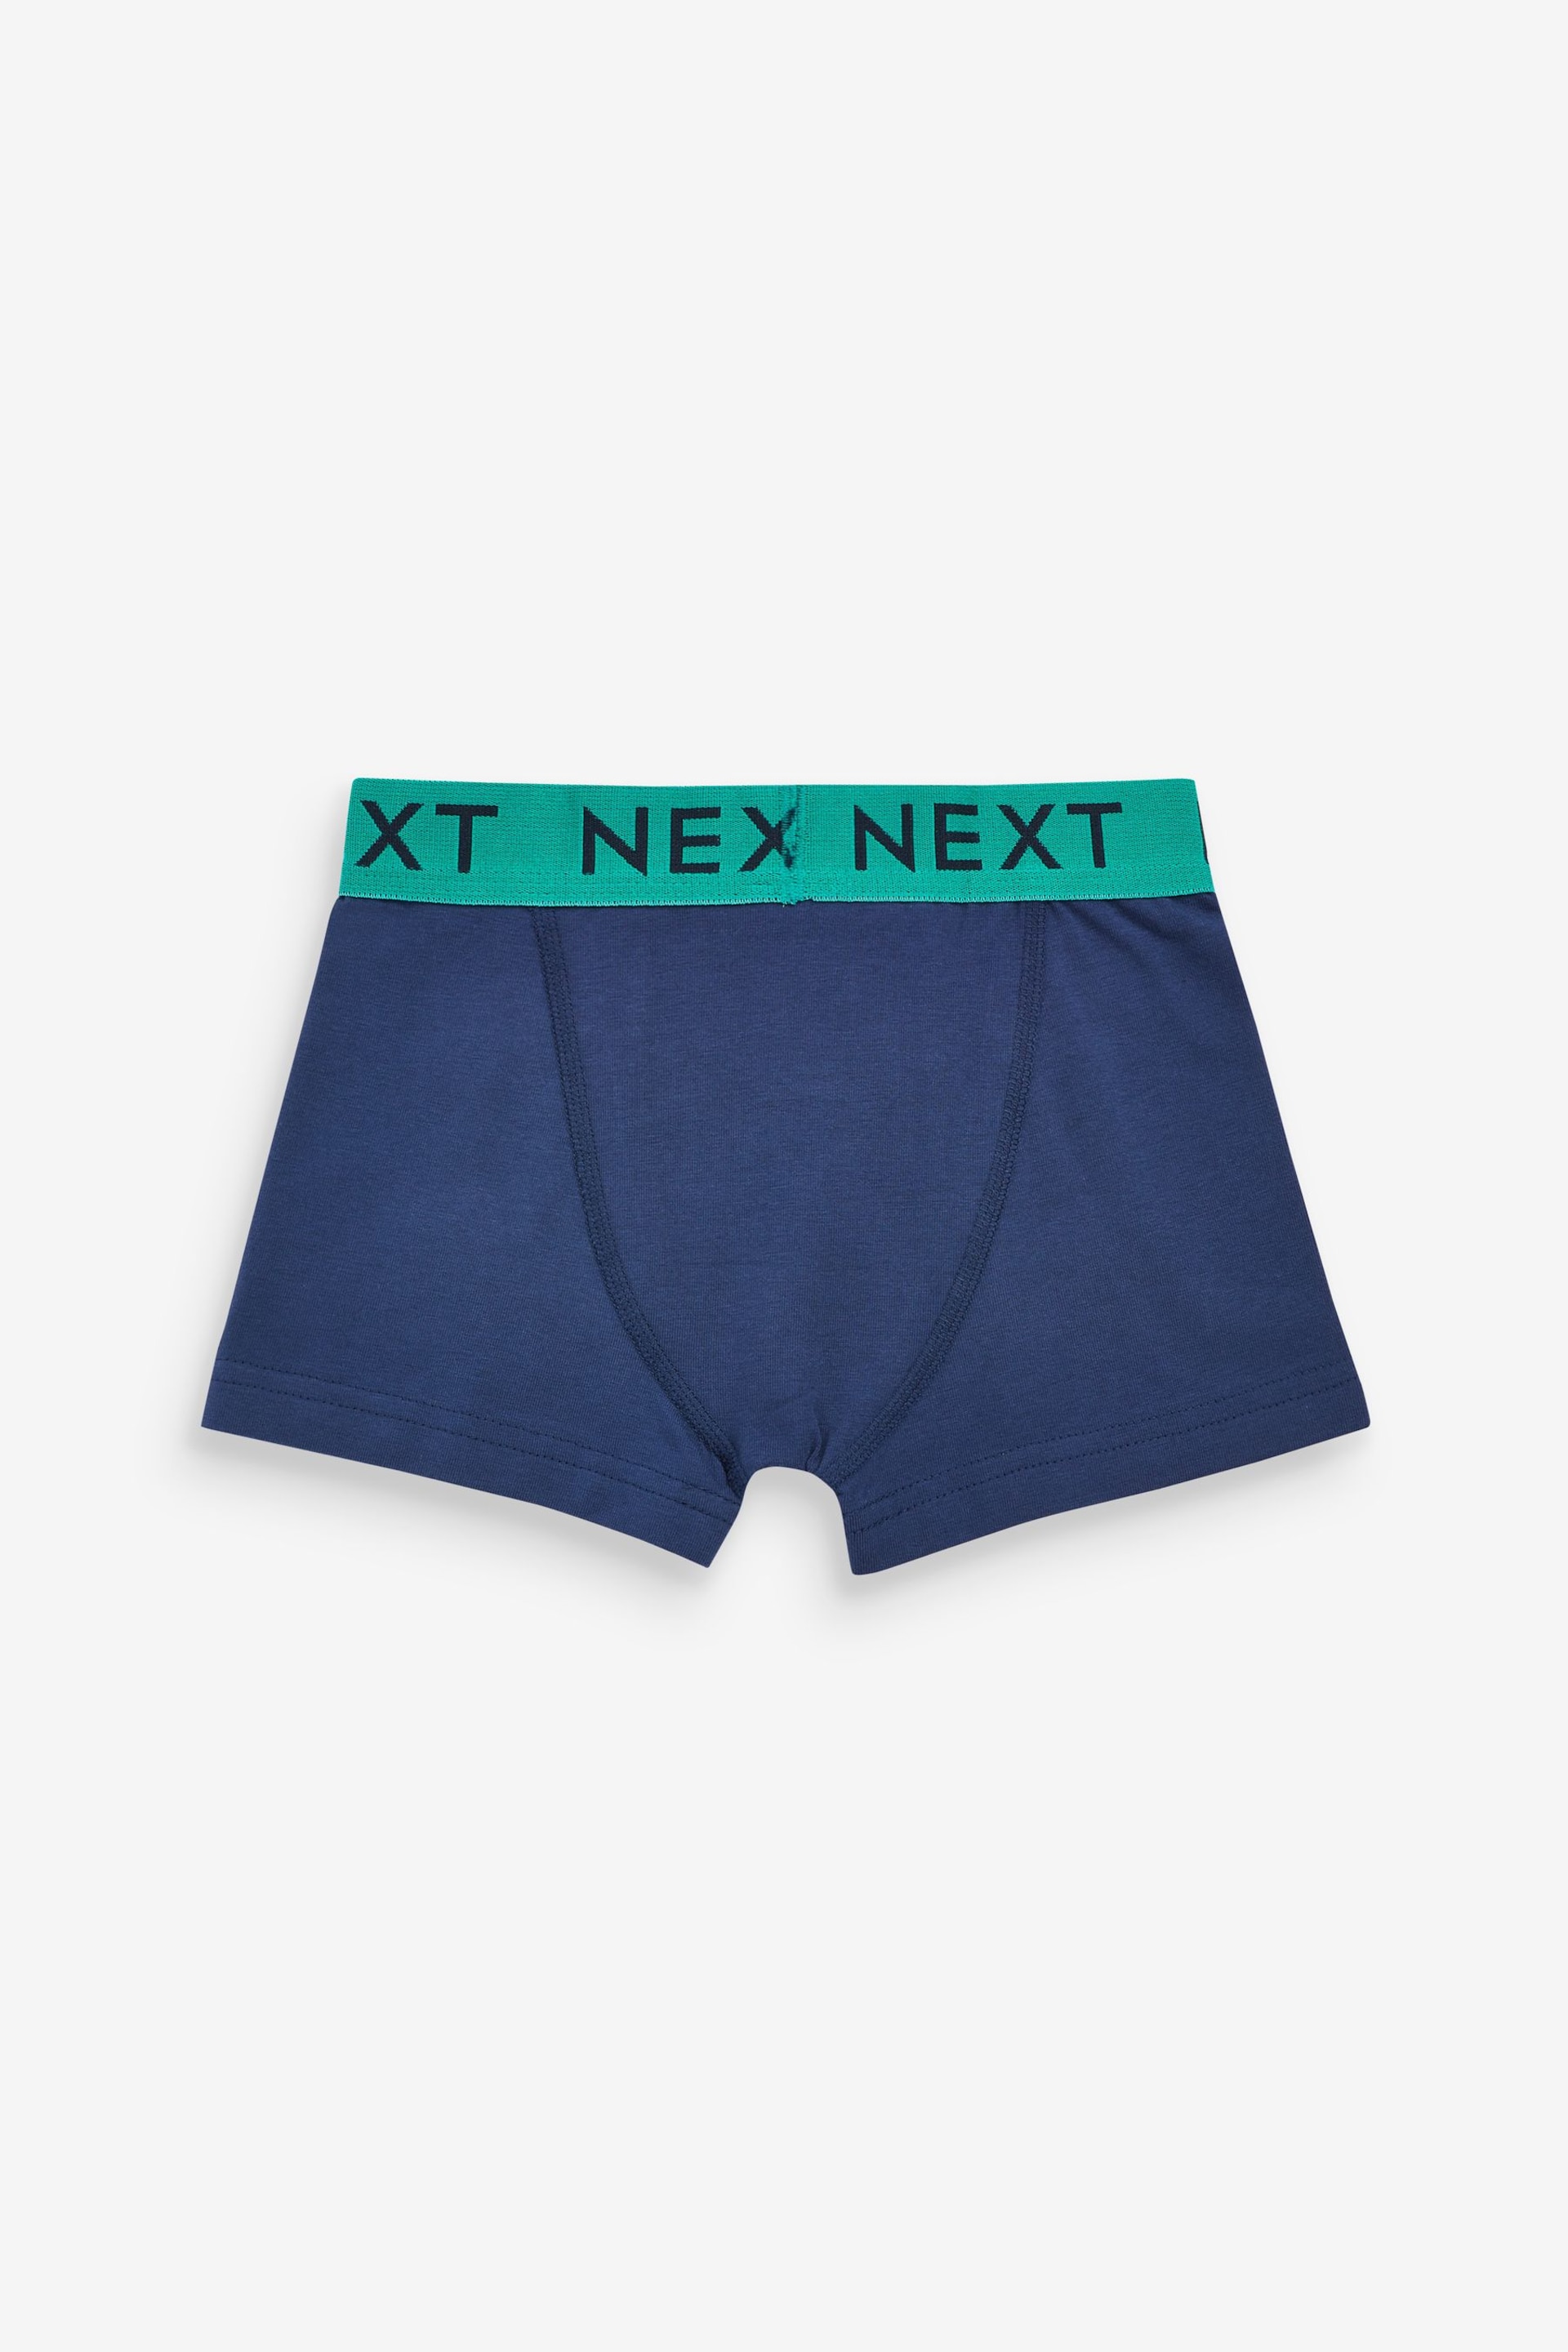 Navy Bright Waistband Trunks 10 Pack (1.5-16yrs) - Image 8 of 11